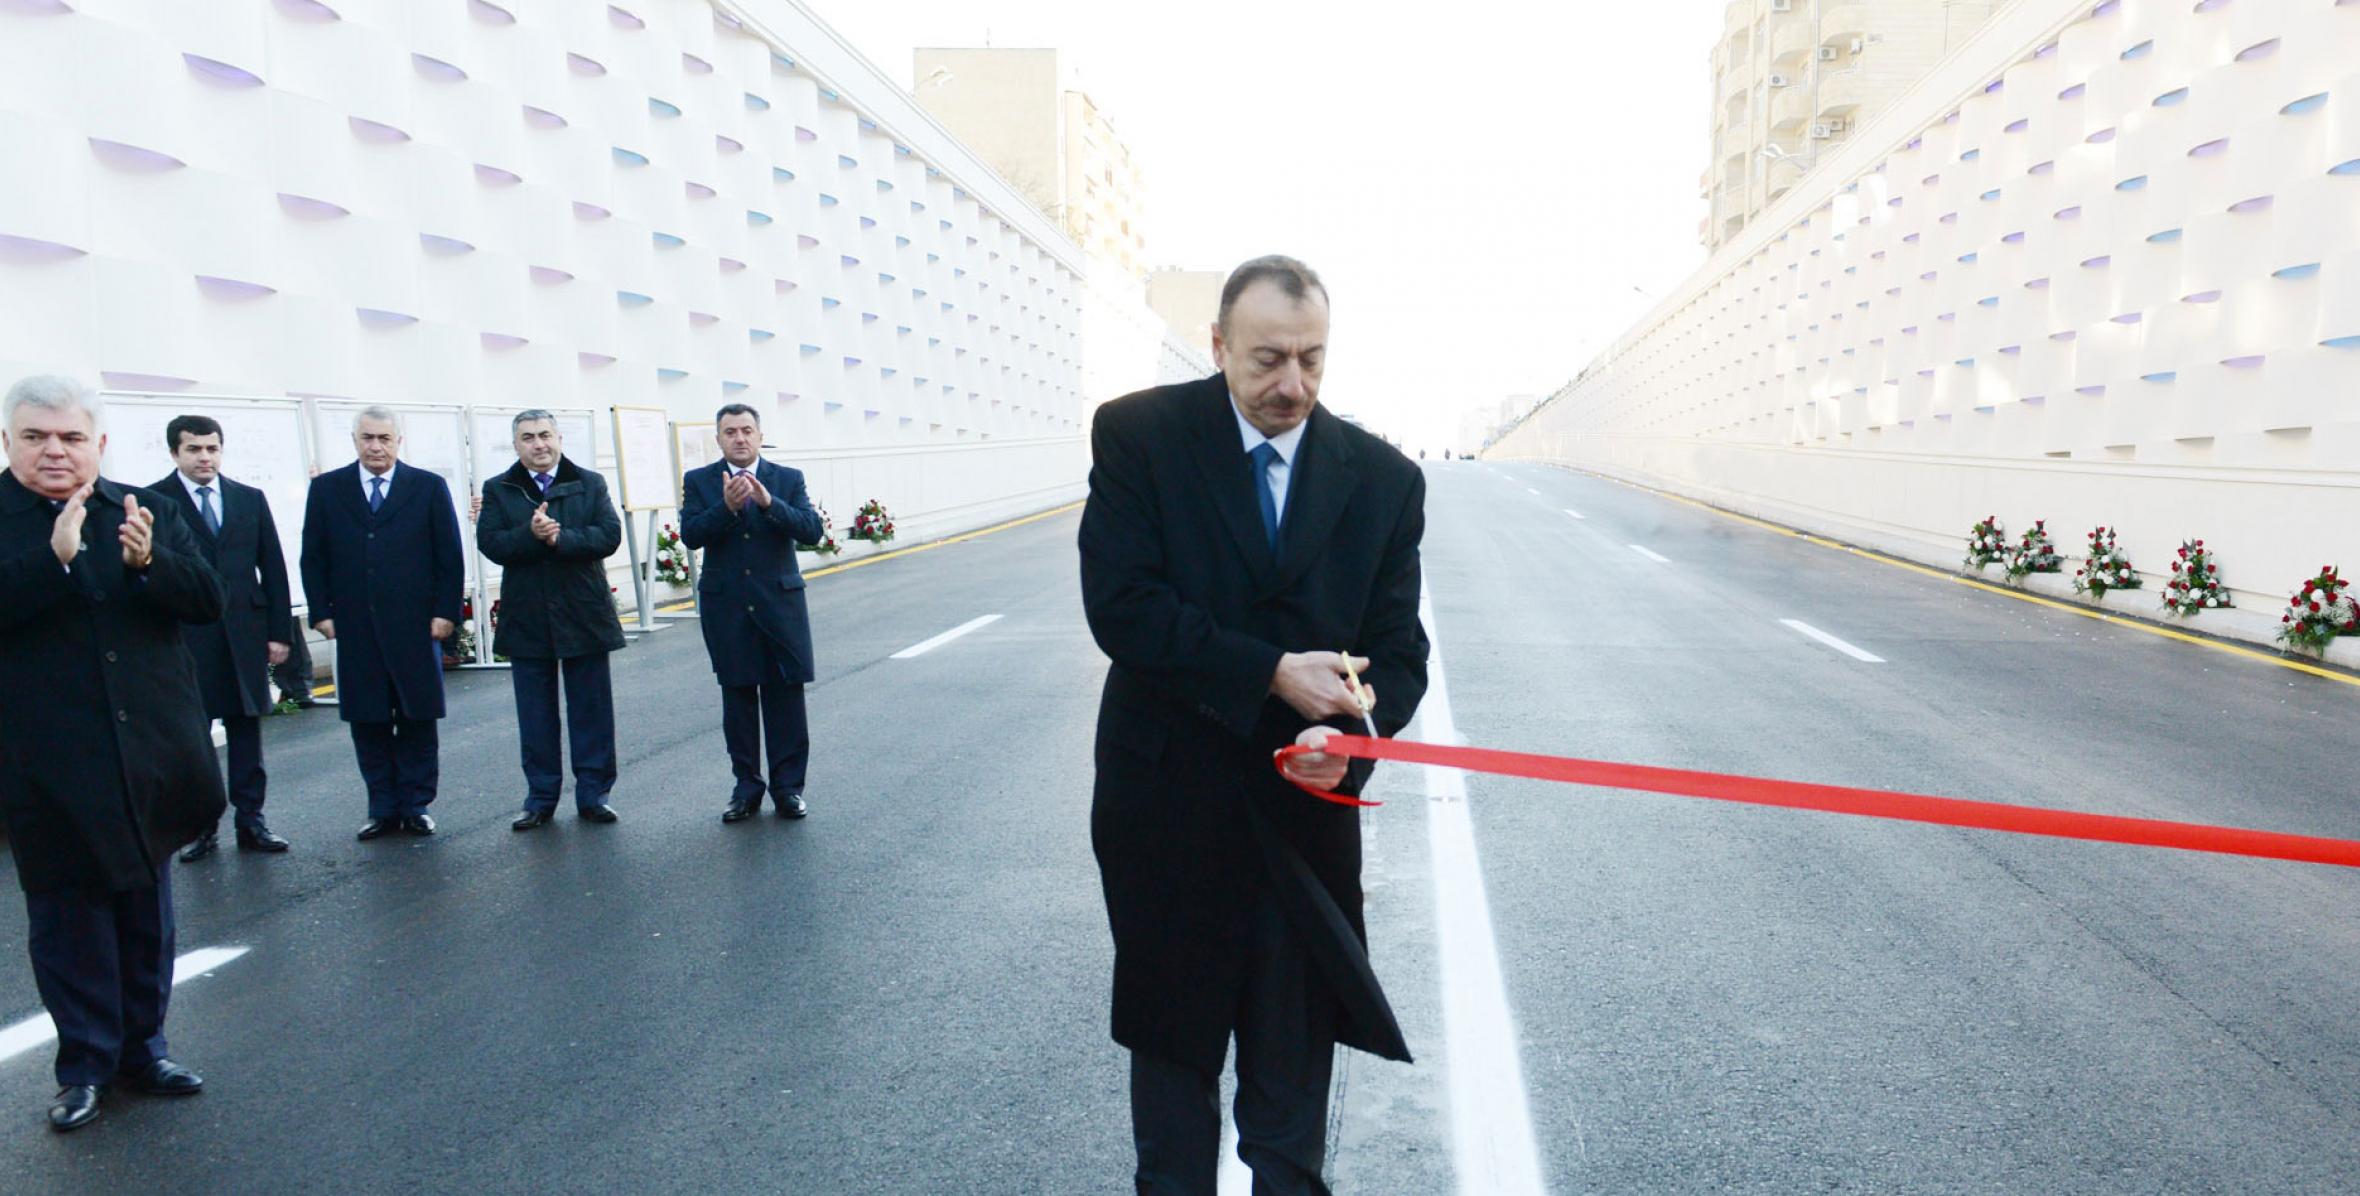 Ilham Aliyev attended the opening of an underground road tunnel at the intersection of Hasan Aliyev and Ataturk Avenues in Baku